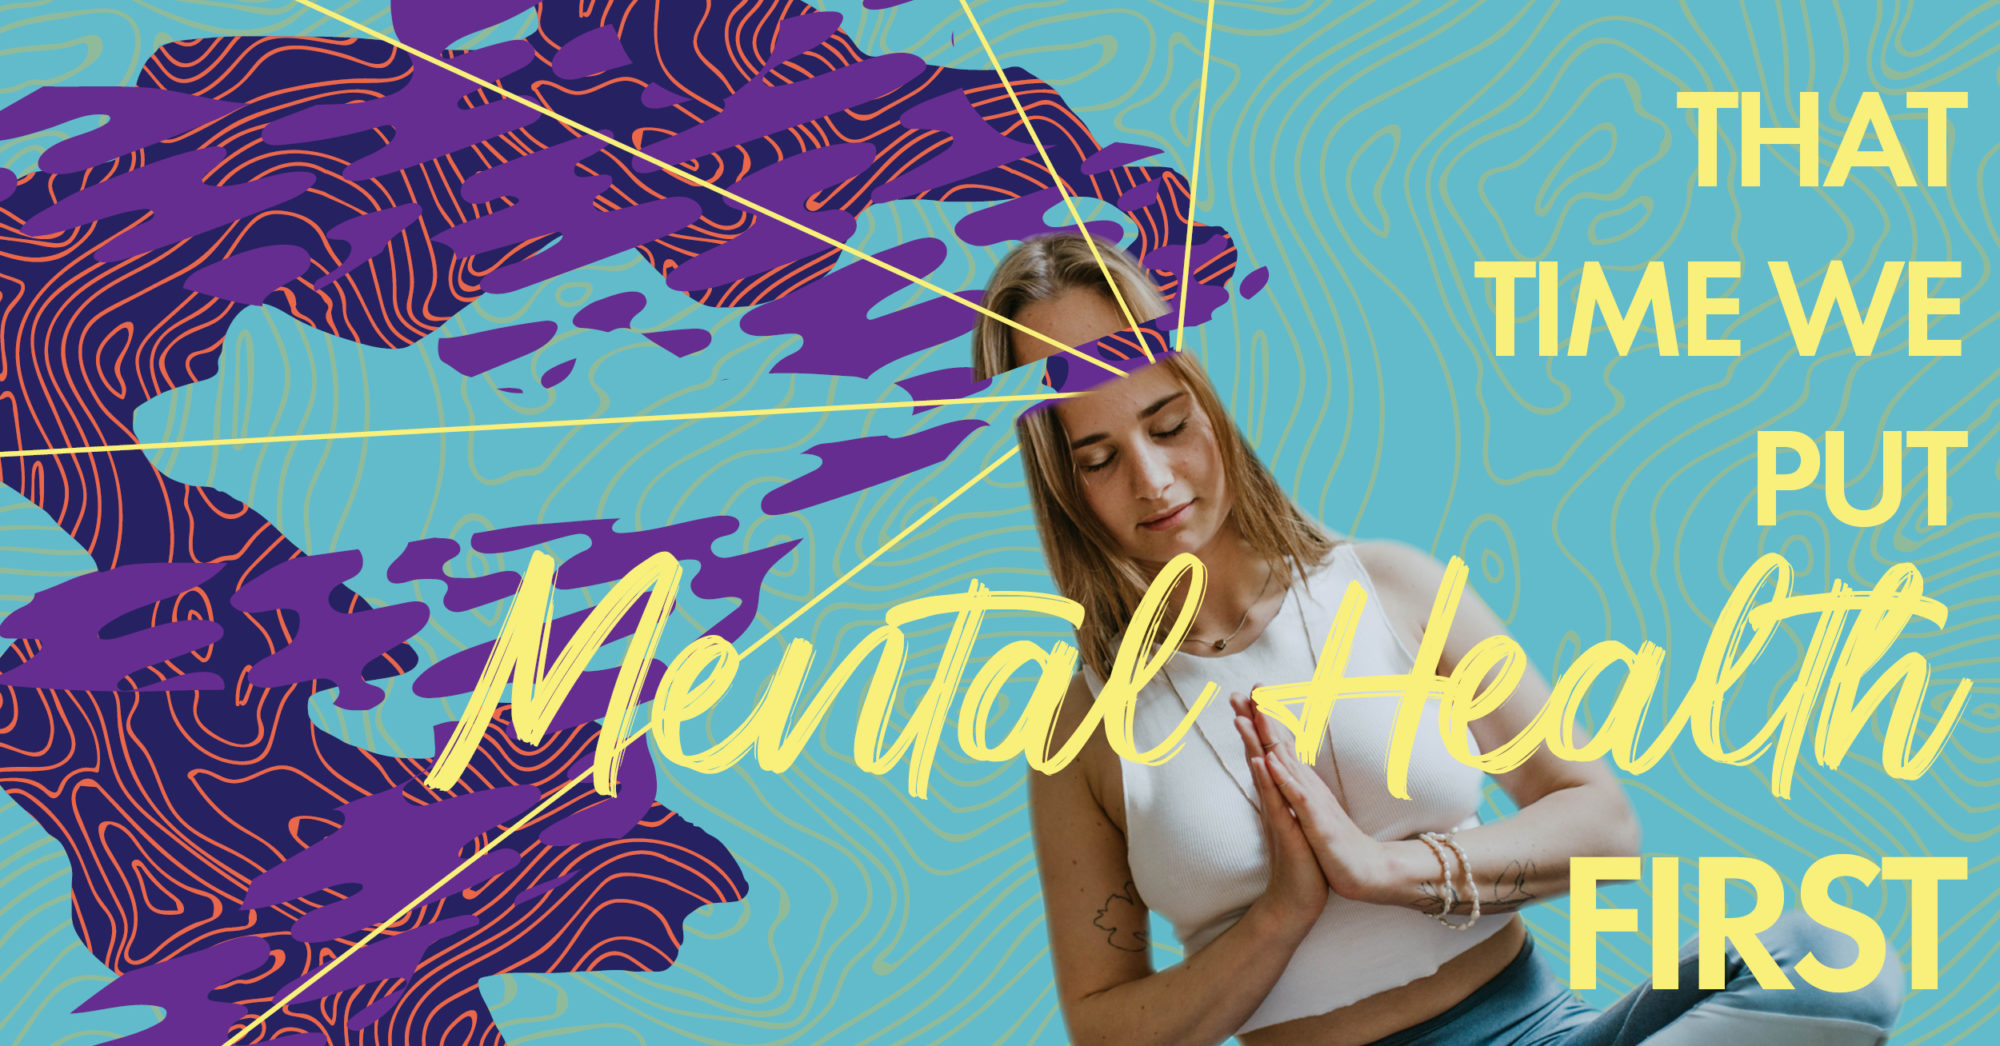 Teal background with a woman meditating and the text,"That Time We Put Mental Health First."